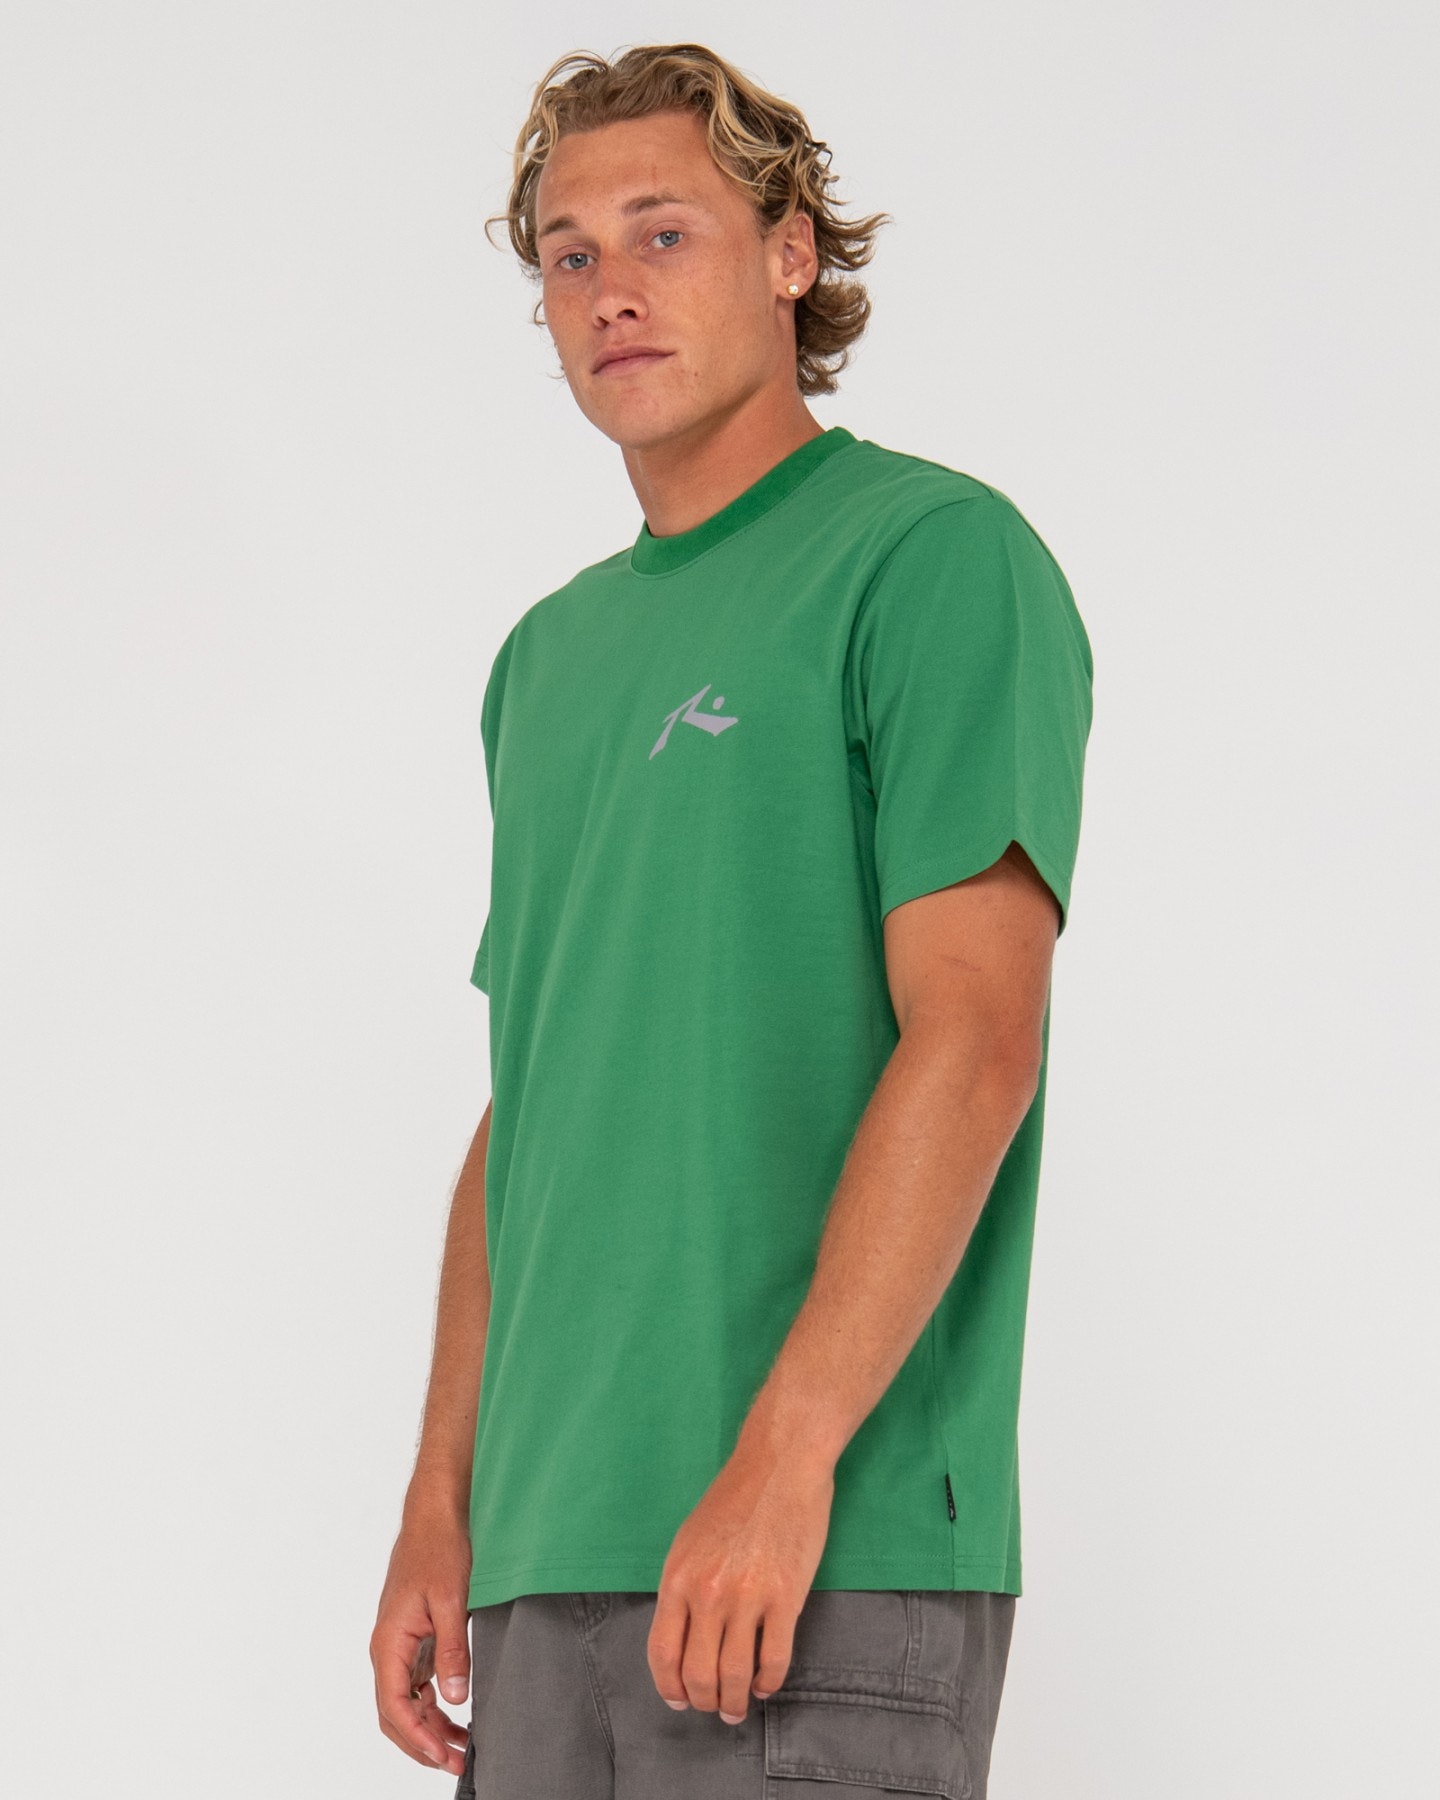 Rusty Competition Short Sleeve Tee - Green | SurfStitch